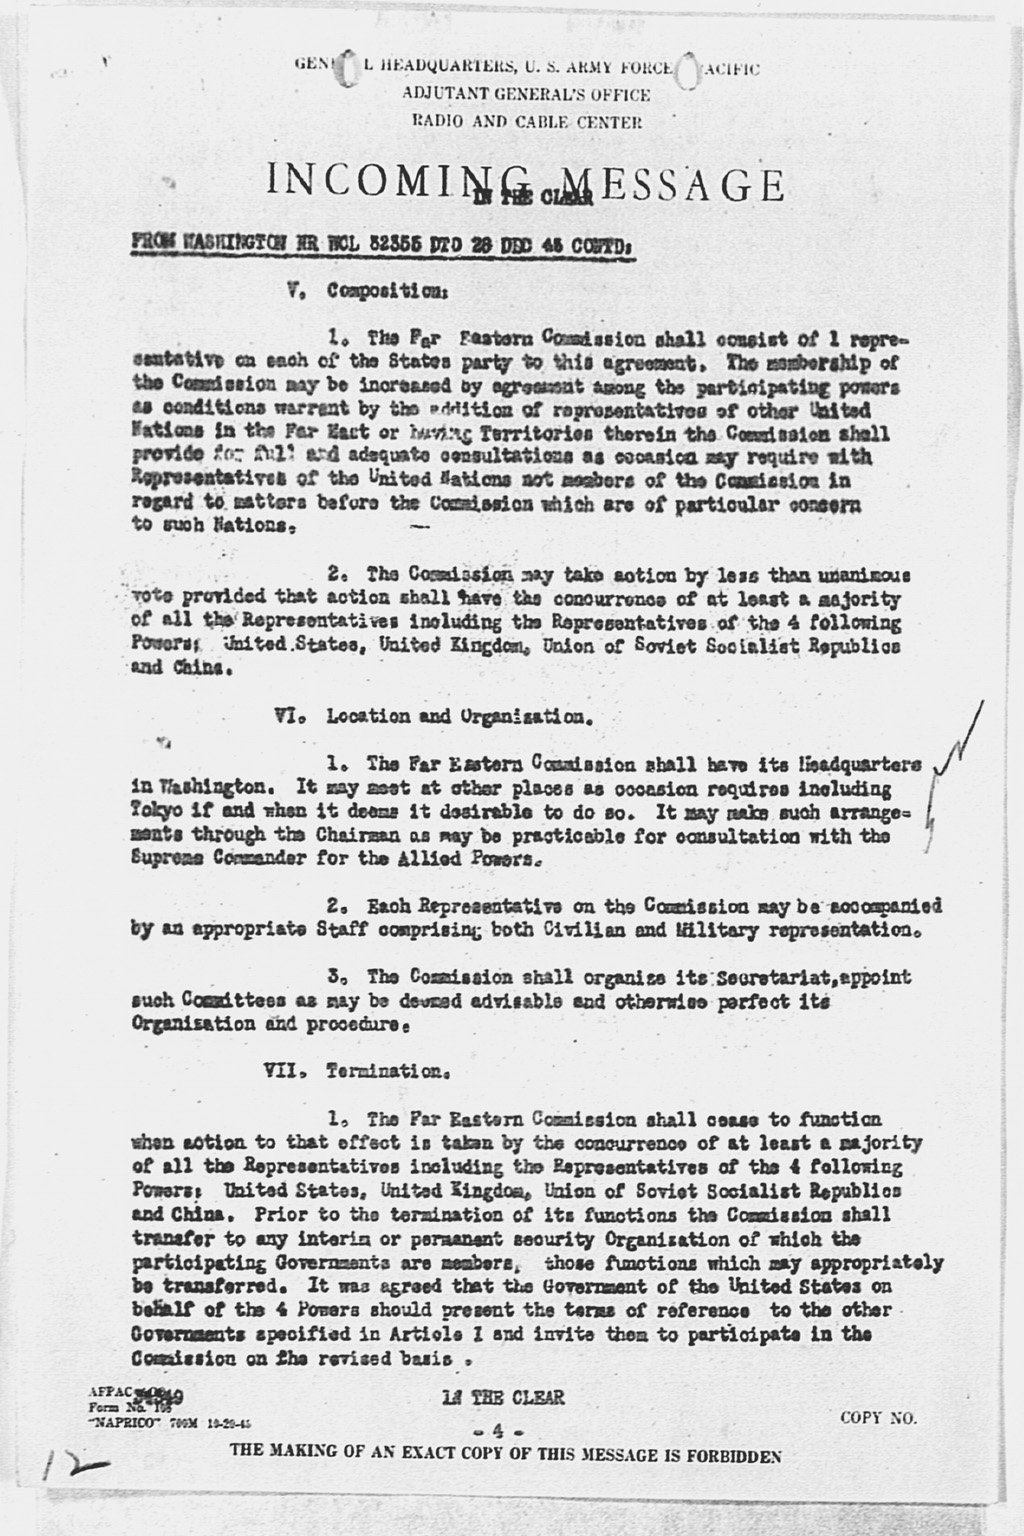 『Incoming Message to CINCAFPAC MacArthur from Washington (War), nr WCL 32355 Communiqué of Moscow Conference, December 27, 1945』(拡大画像)